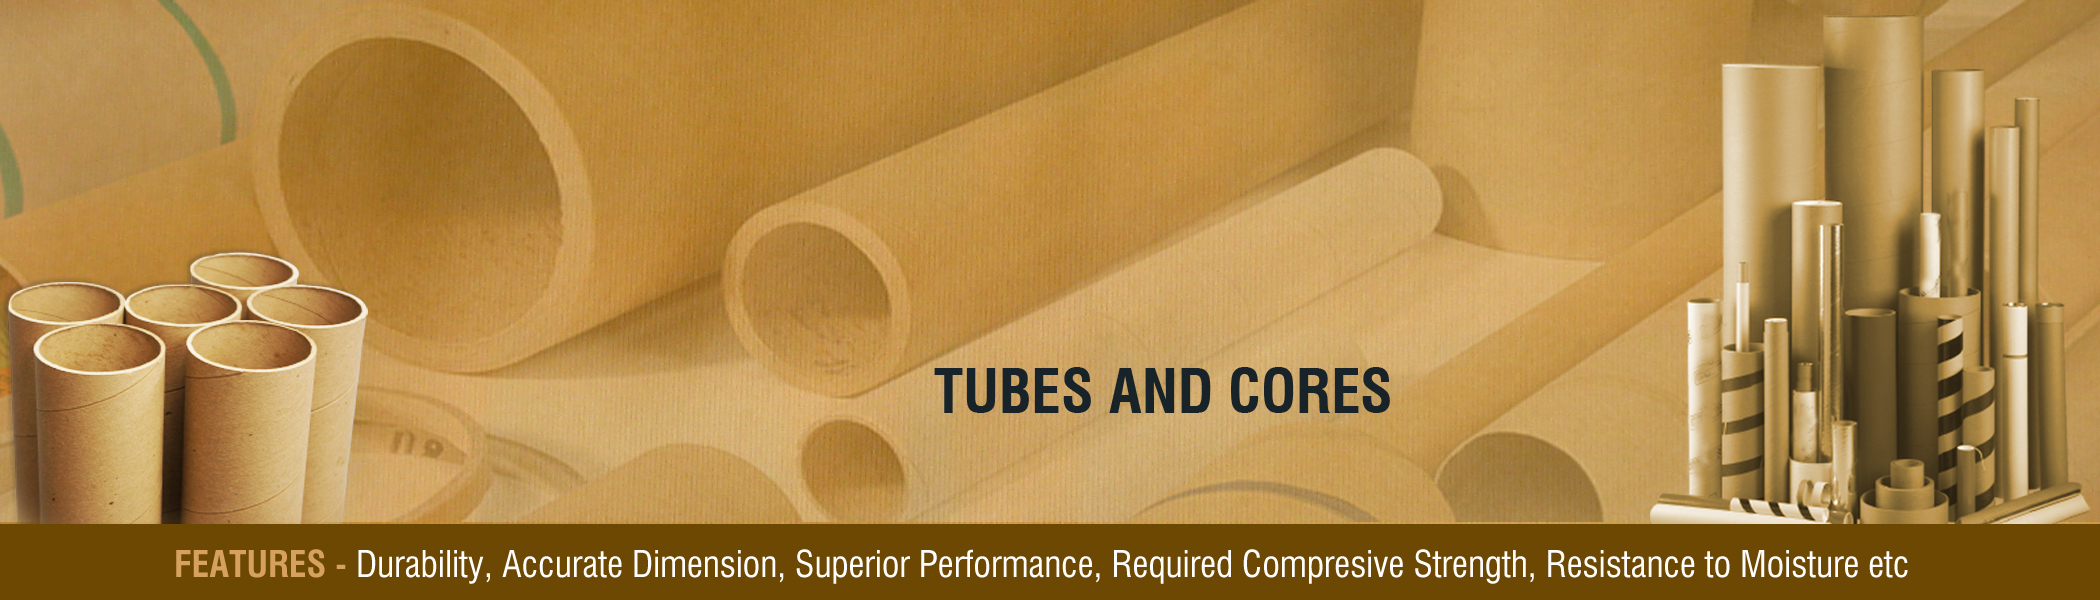 Tubes and Cores